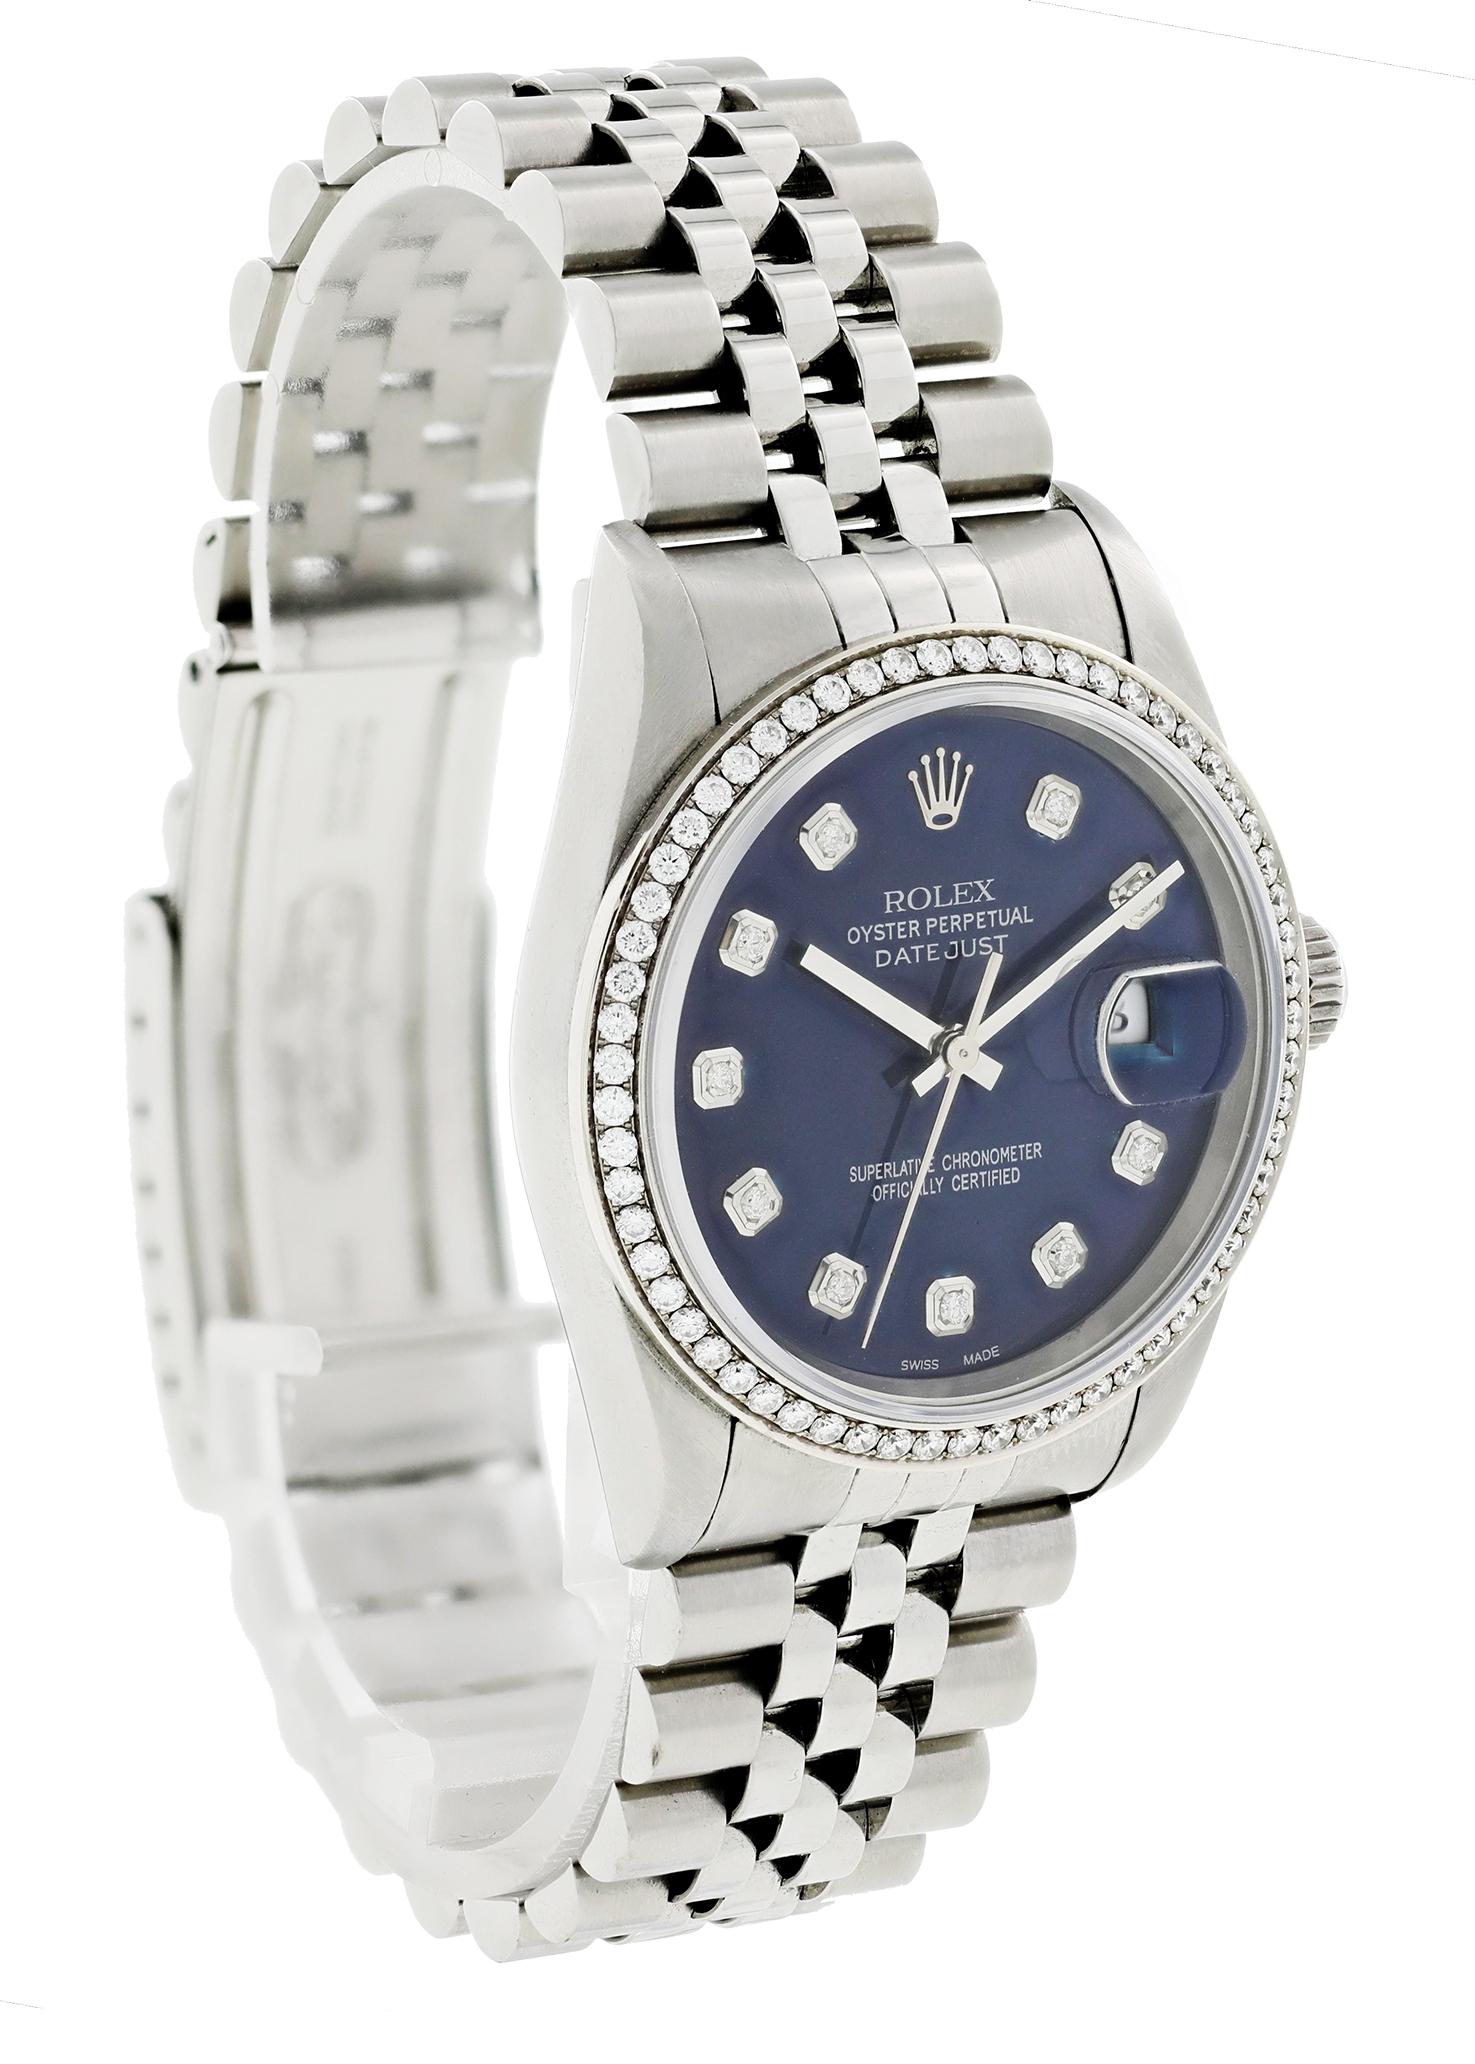 Rolex Datejust 16234 Diamond Men's Watch In Excellent Condition For Sale In New York, NY